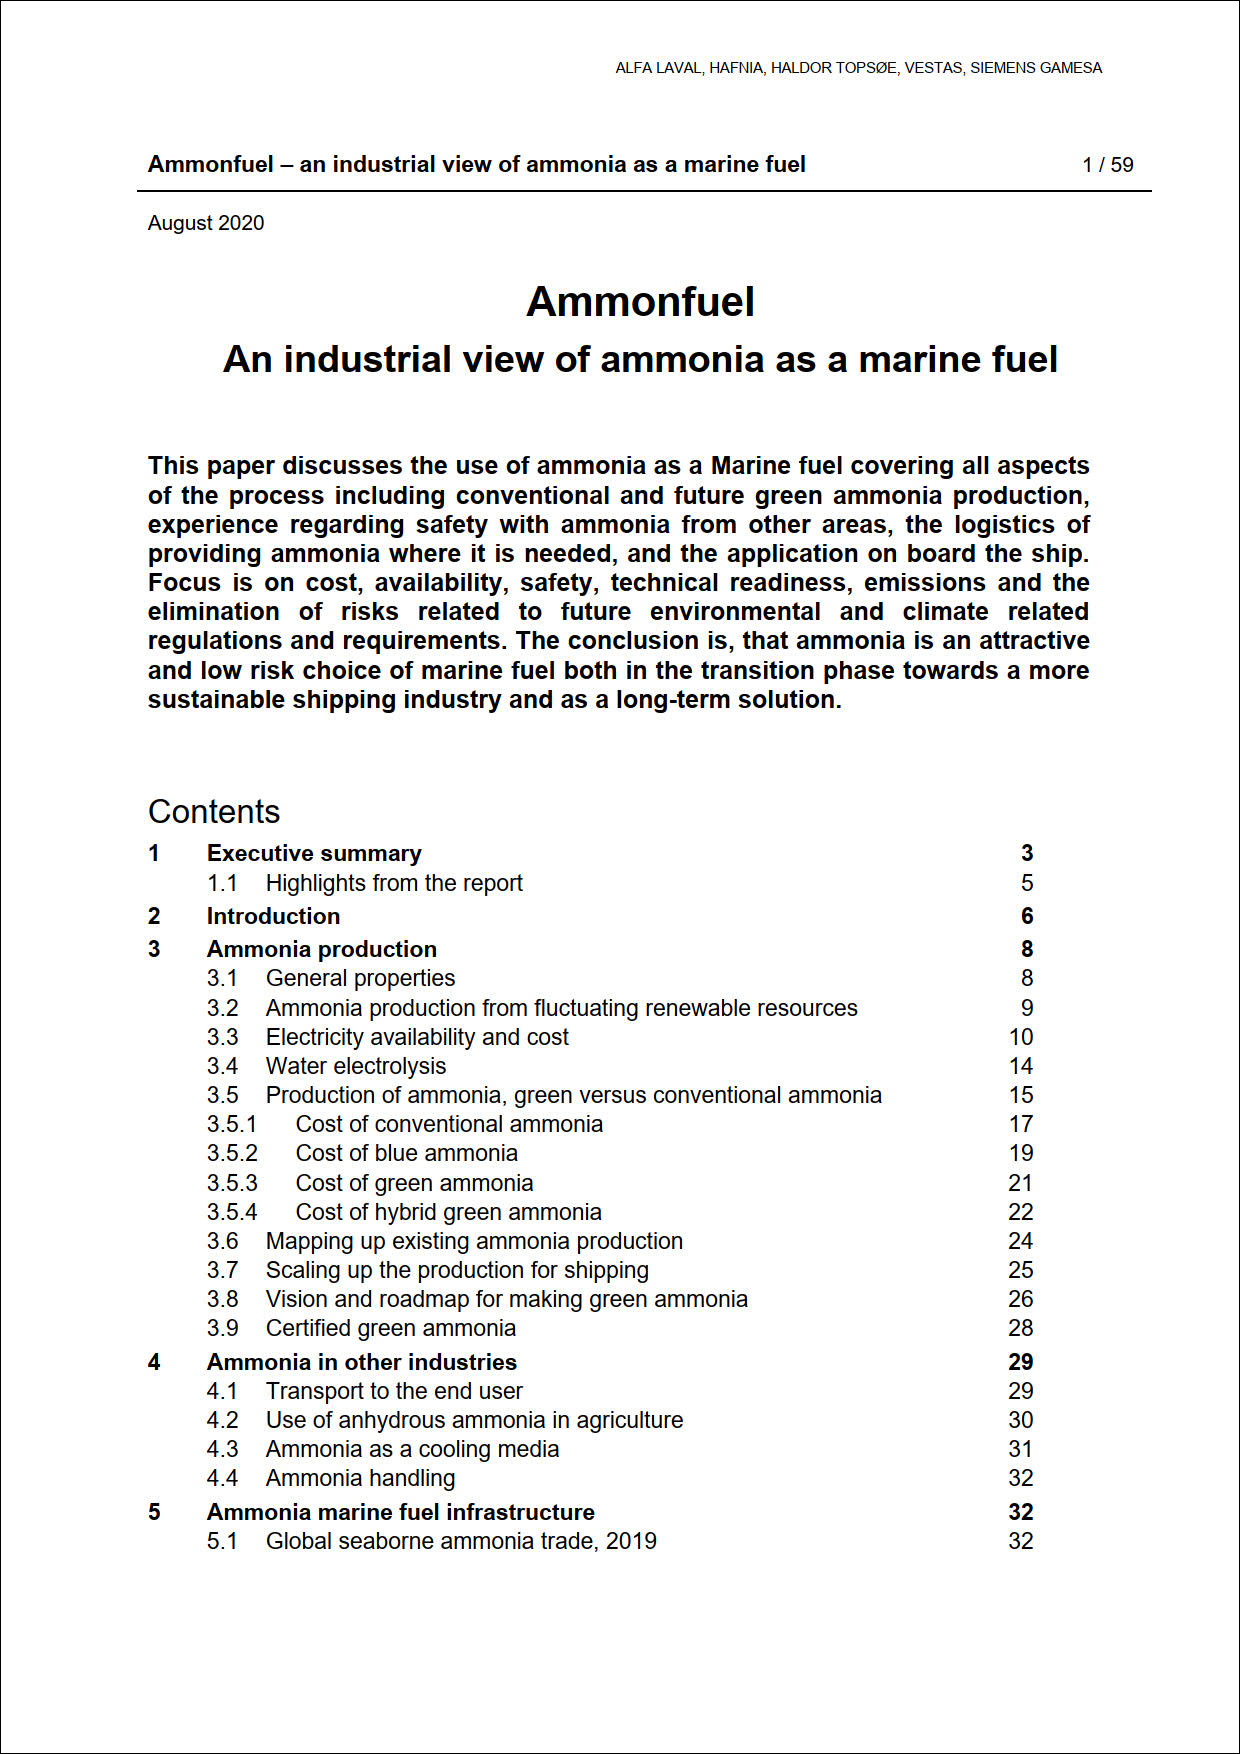 Ammonfuel - An industrial view of ammonia as a marine fuel